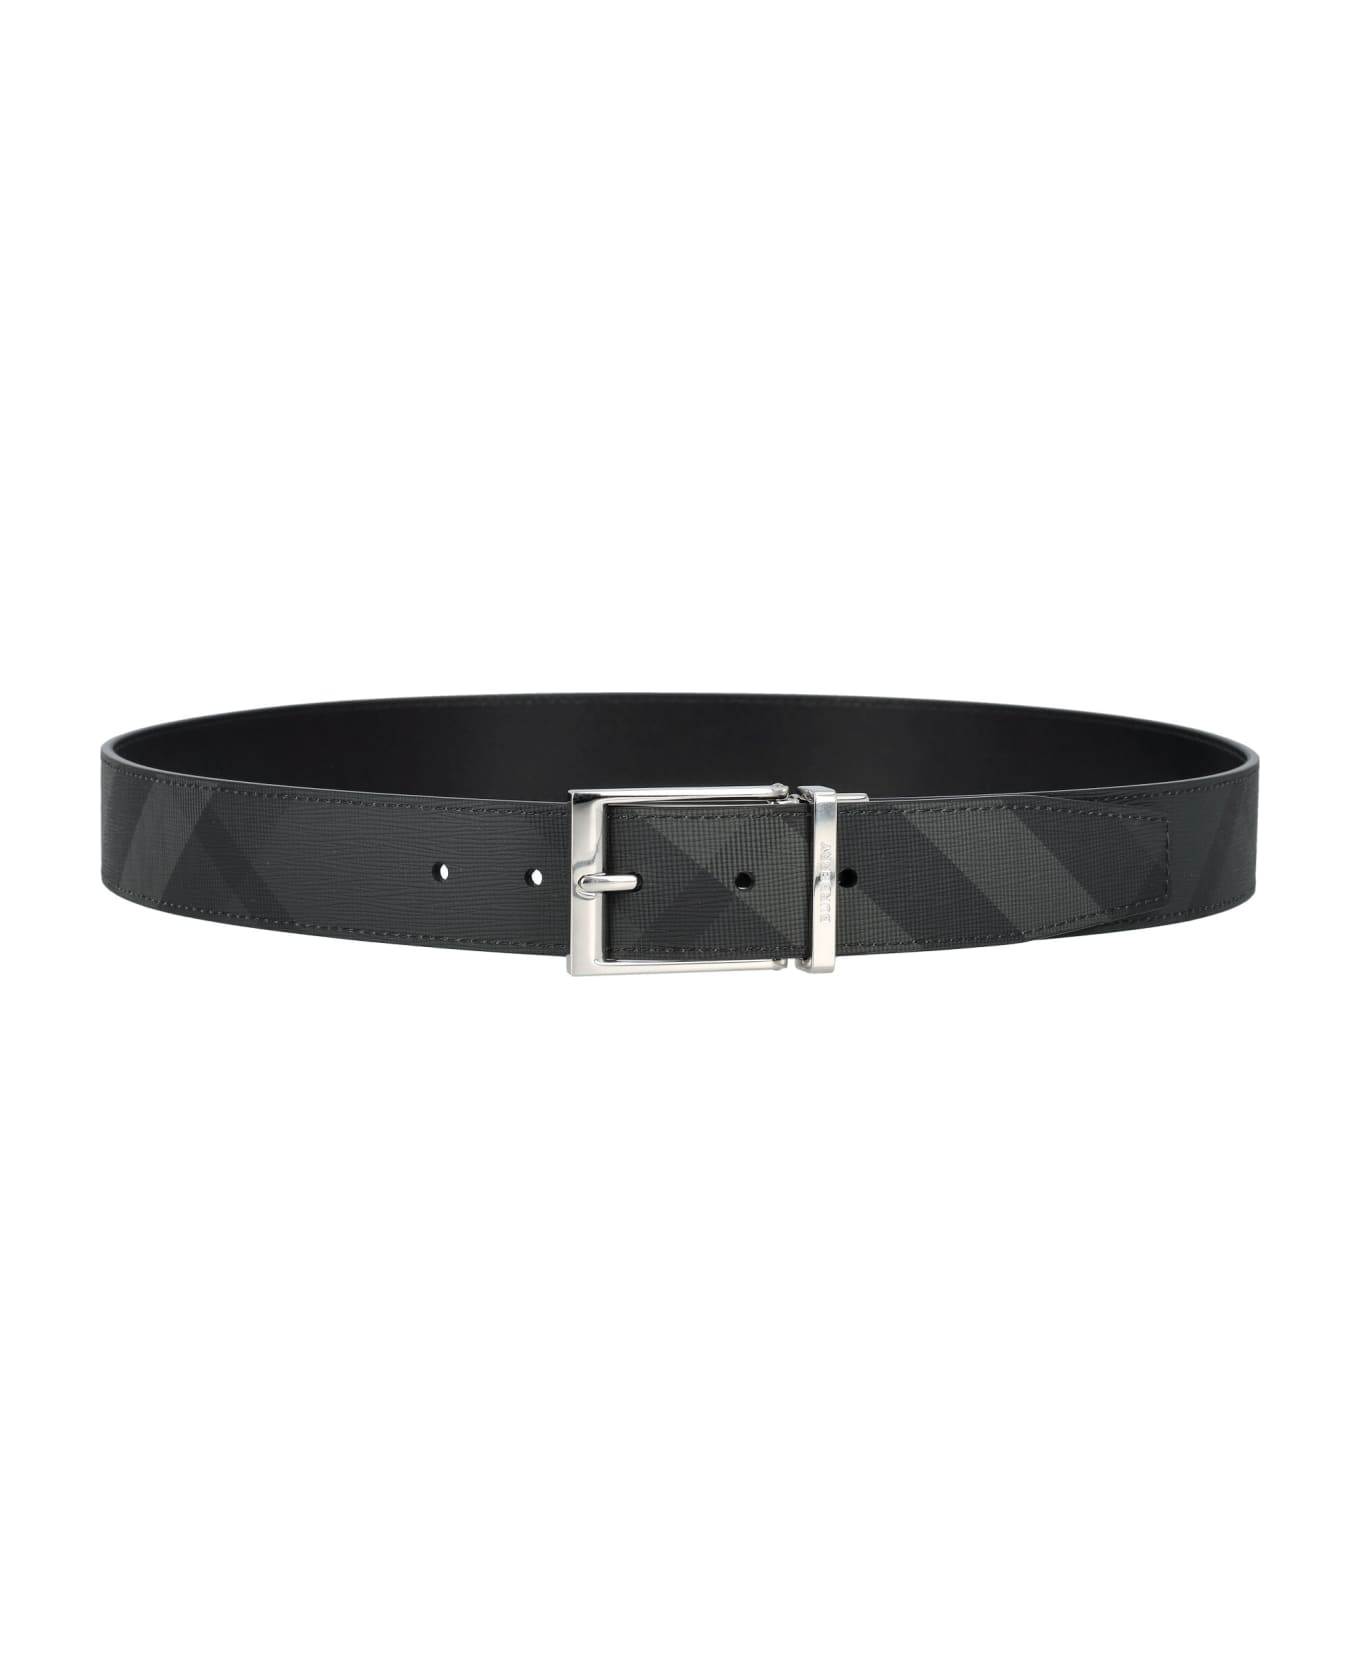 Burberry London Check And Leather Reversible Belt - CHARCOAL/SILVER